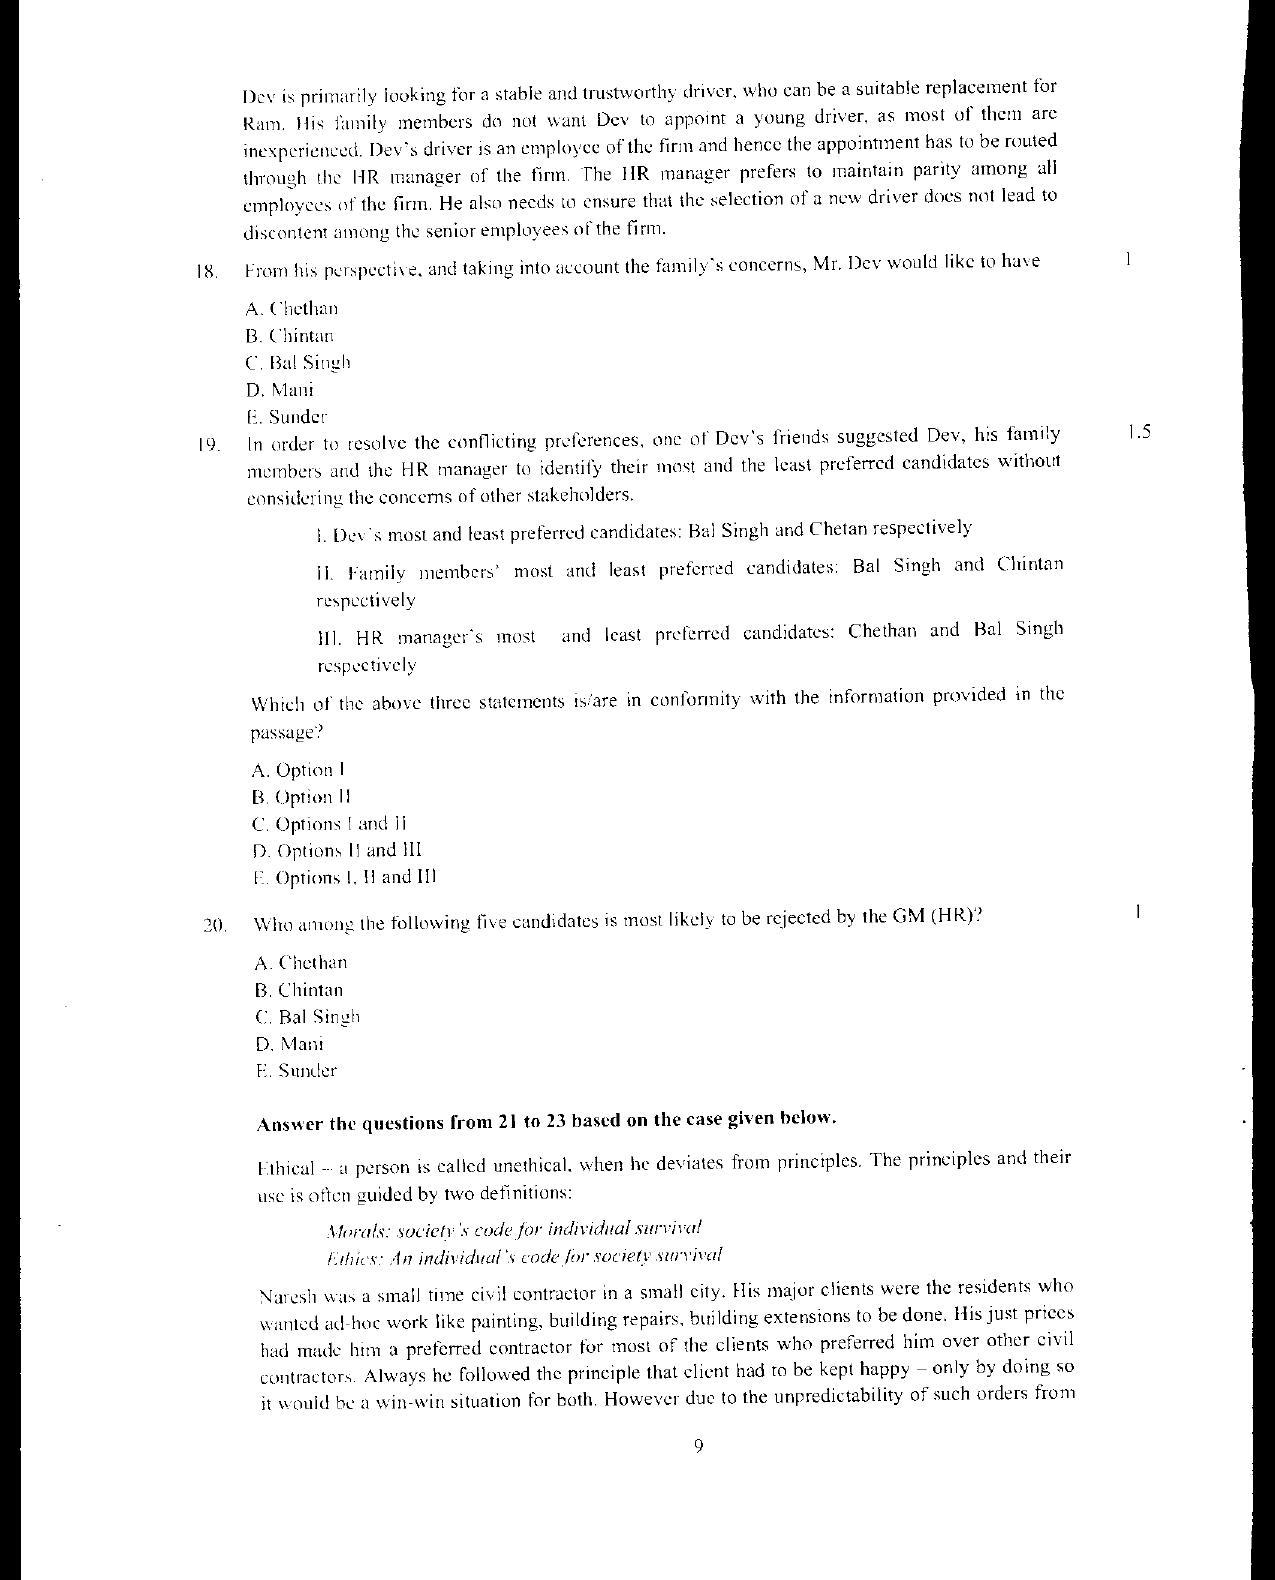 XAT 2012 Question Papers - Page 10